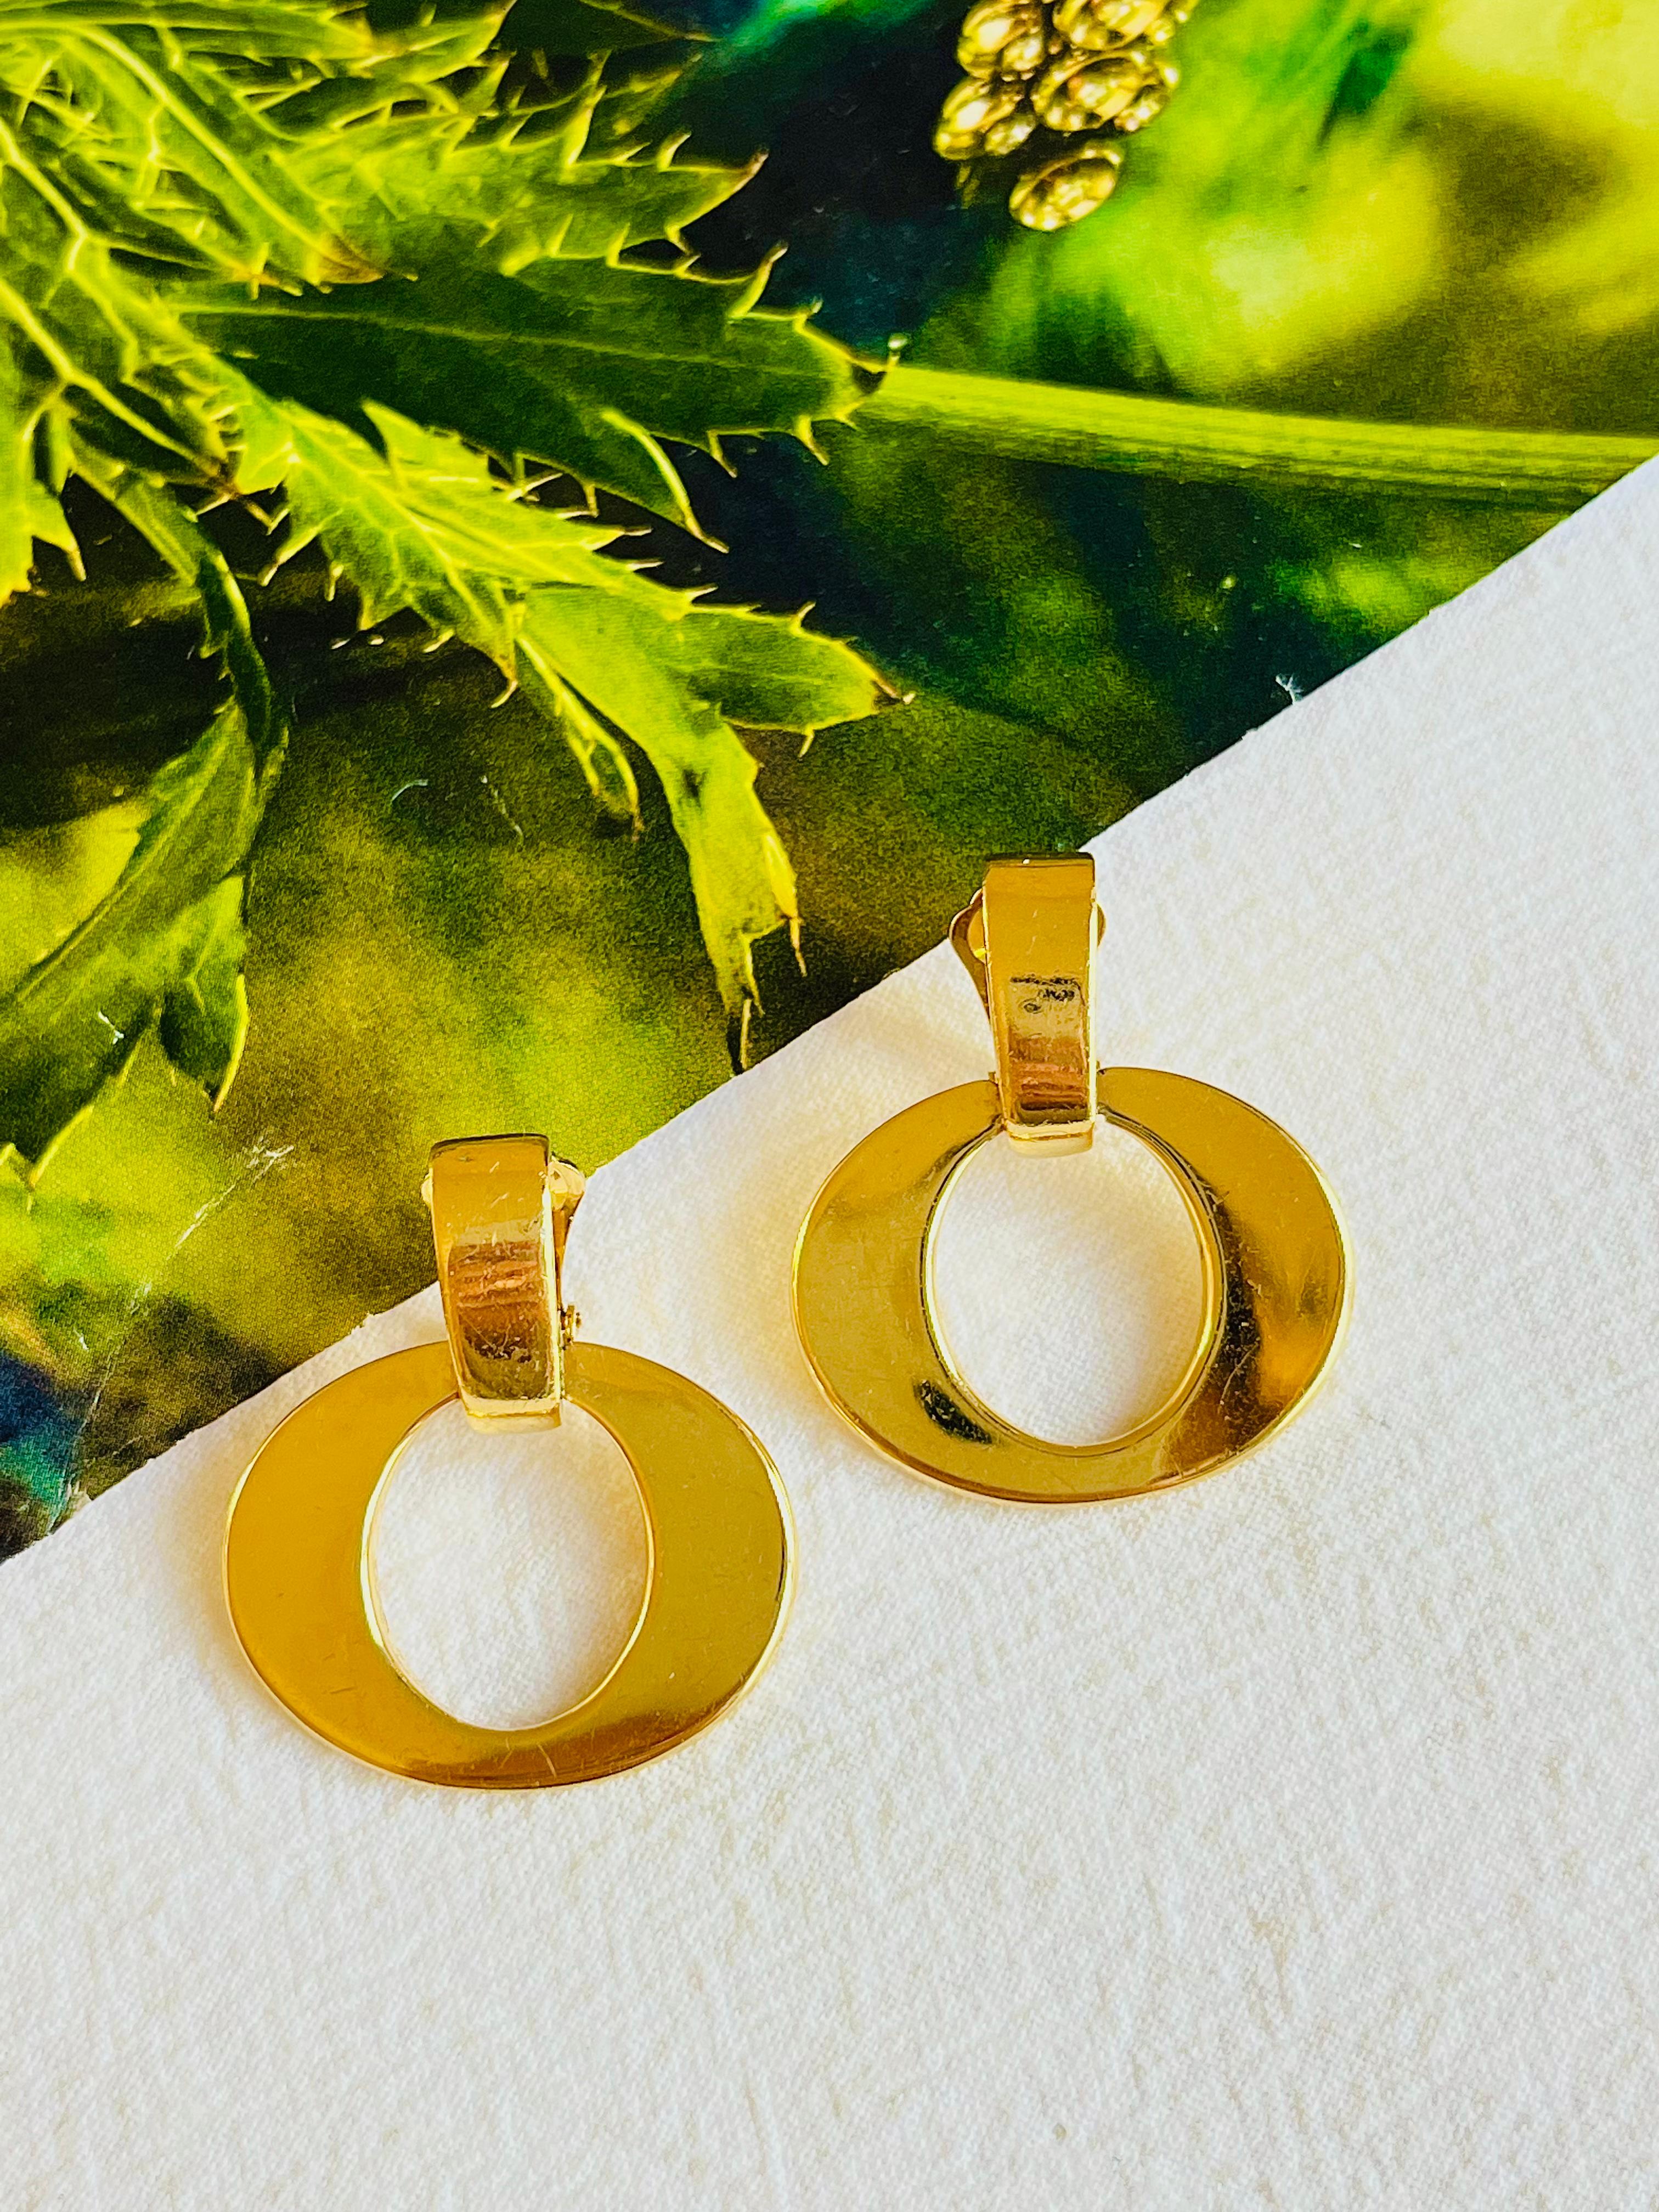 Very good condition. Not any colour loss. Some light scratches on the surface. 100% Genuine.

A very beautiful pair of earrings by Chr. DIOR, signed at the back.

Size: 3.0*3.5 cm.

Weight: 9.0 g/each.

_ _ _

Great for everyday wear. Come with